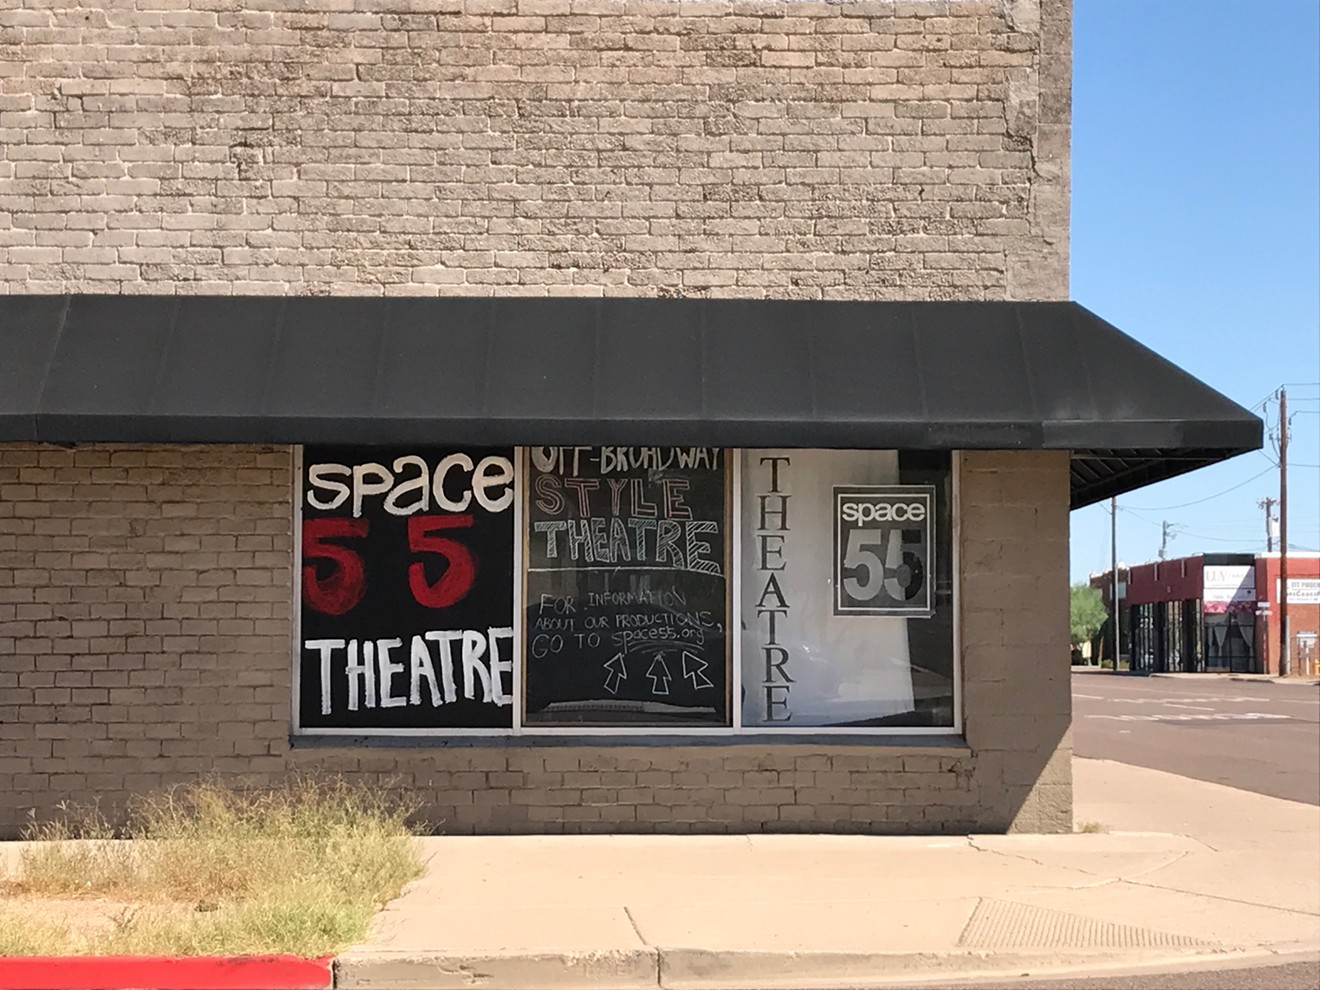 The Space 55 theater ensemble's current location, which was recently sold.